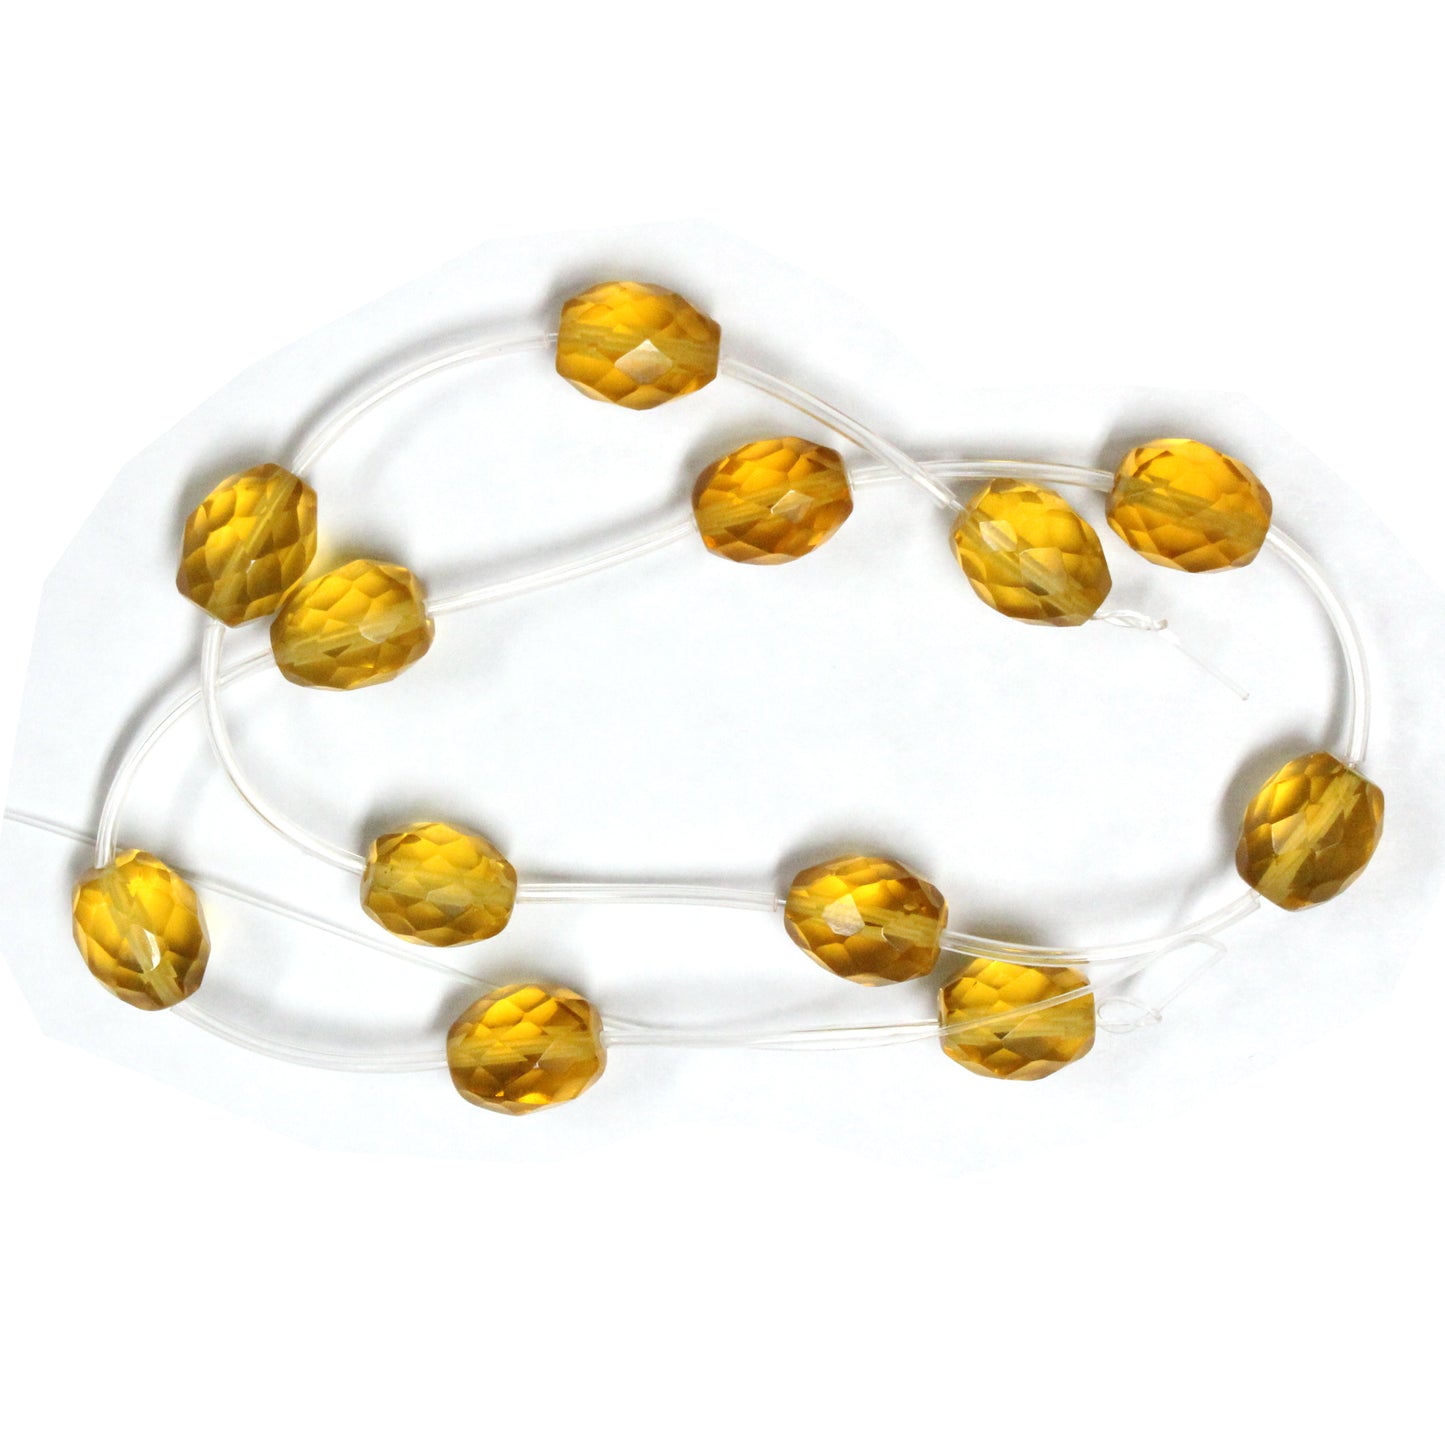 Yellow Topaz Faceted Oval Bead / 12 x 10mm / man-made translucent stone bead